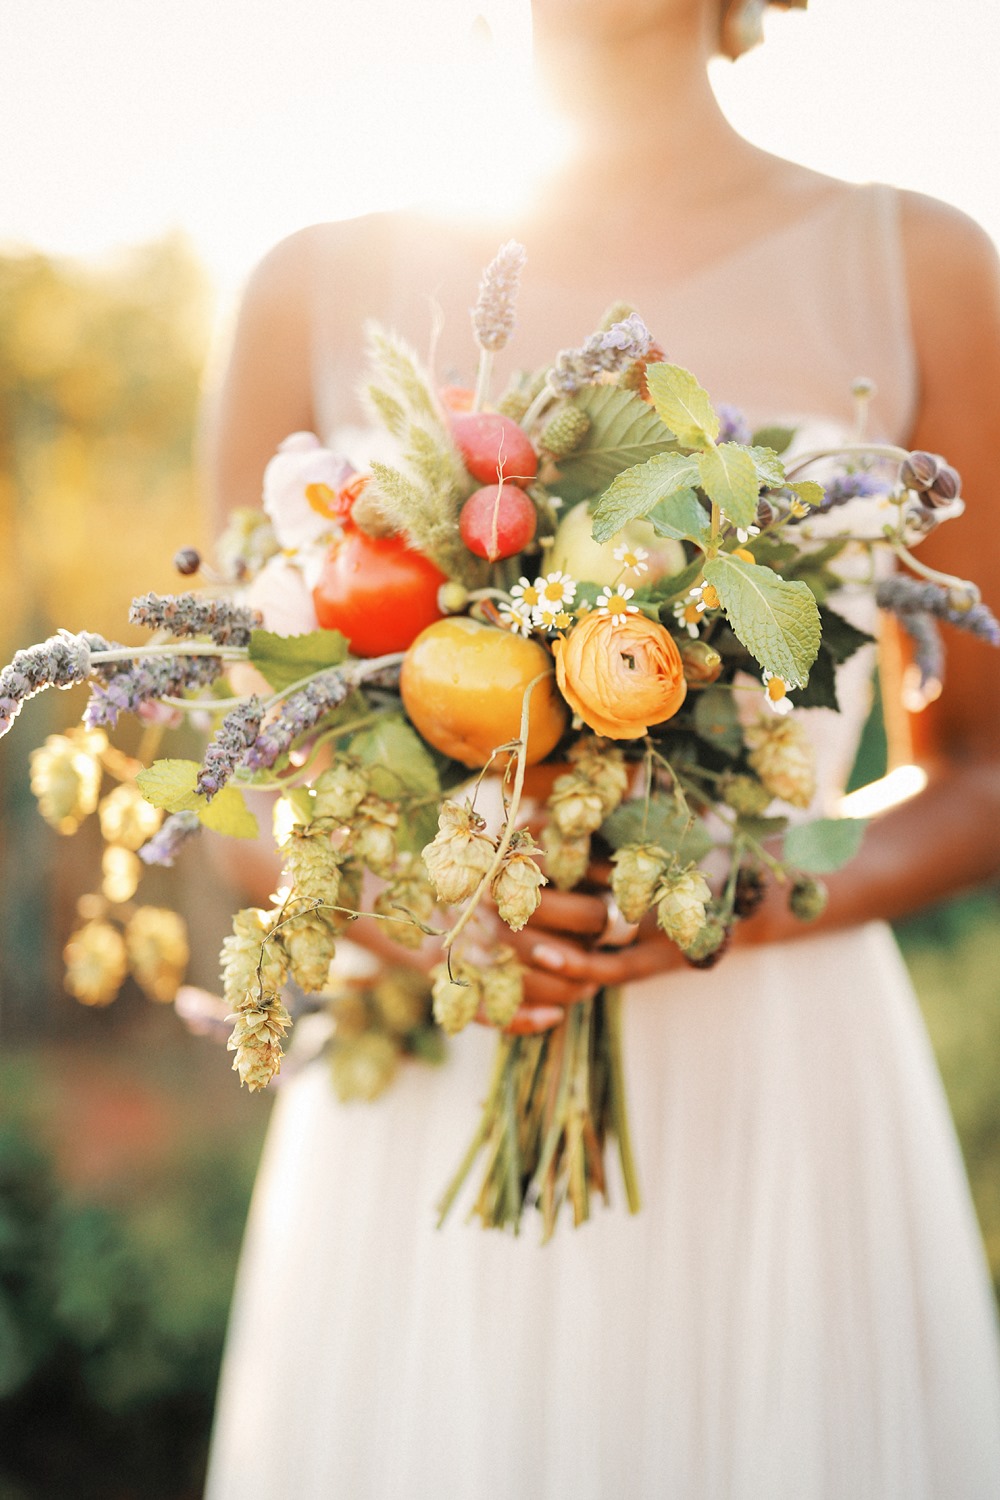 organic bridal bouquet with lavender, hops, ranunculus, radishes and heirloom tomatoes